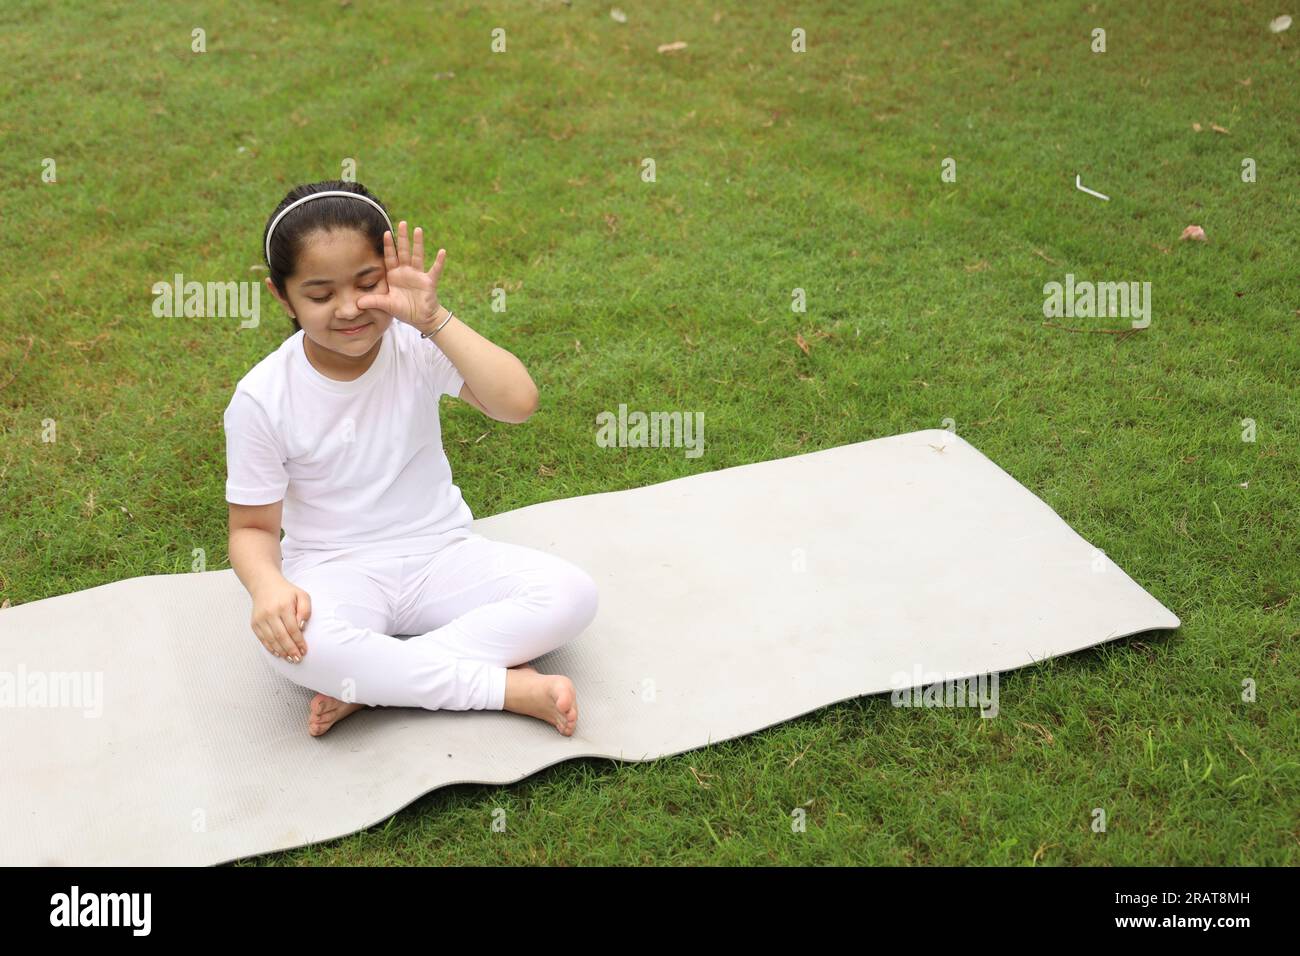 Young kid doing yoga exercises early morning in a green public park. We can see ducks around. The child is health conscious. Happy girl yoga. Stock Photo